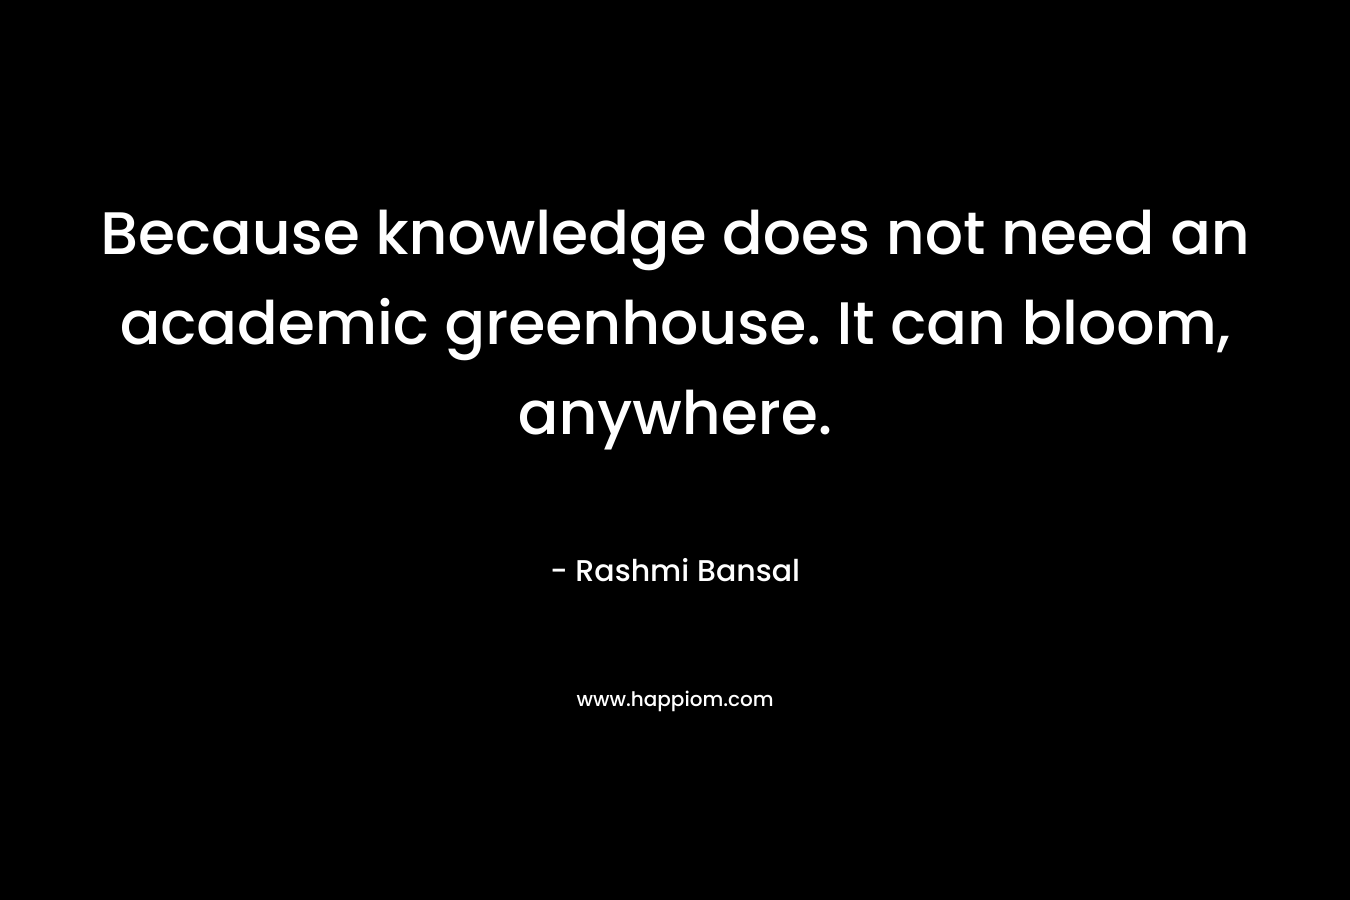 Because knowledge does not need an academic greenhouse. It can bloom, anywhere.